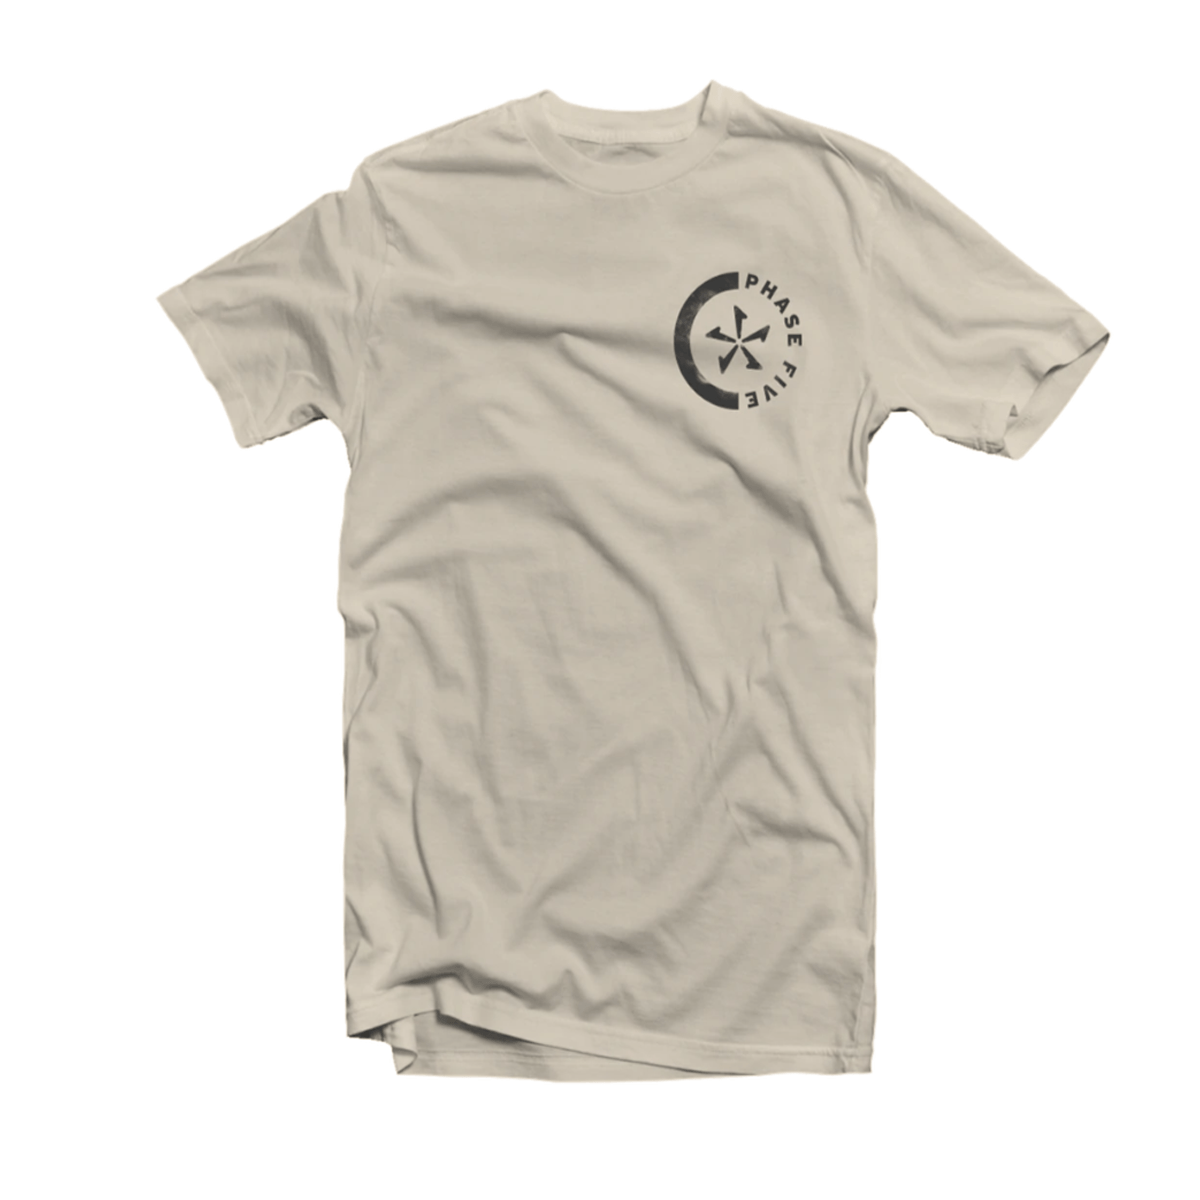 Phase 5 Symbol Tee in Sand - BoardCo